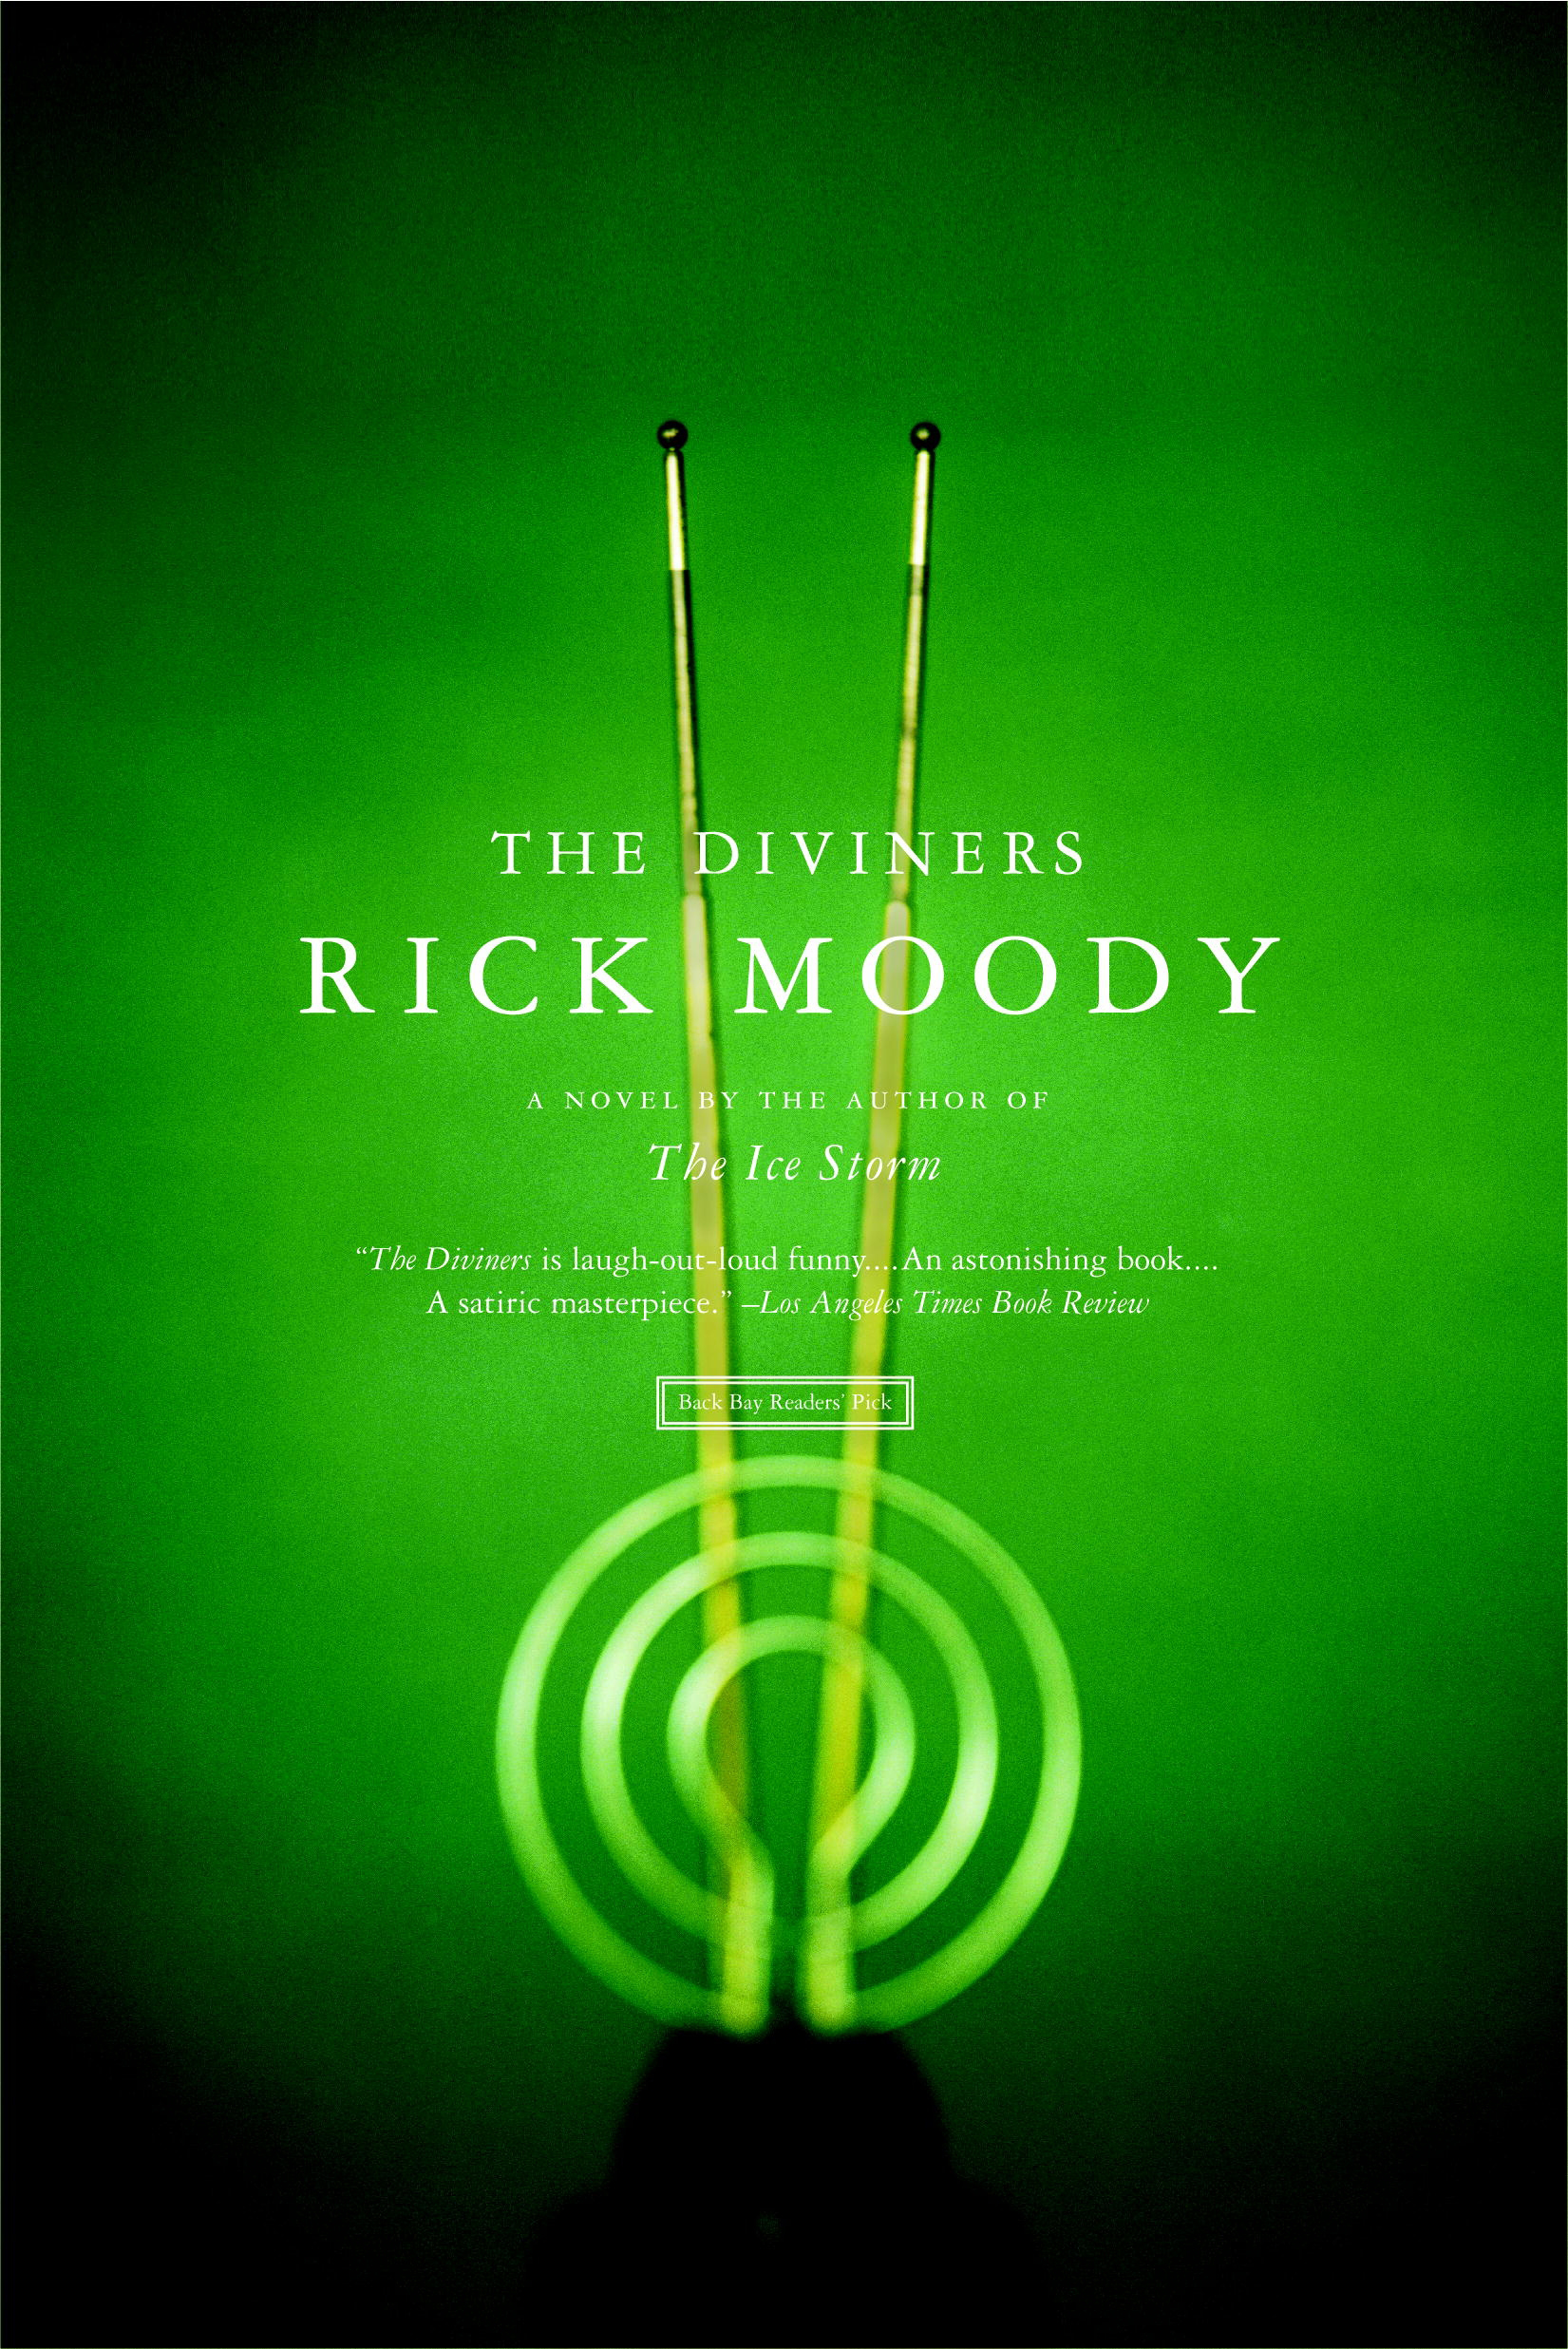 The Diviners by Rick Moody